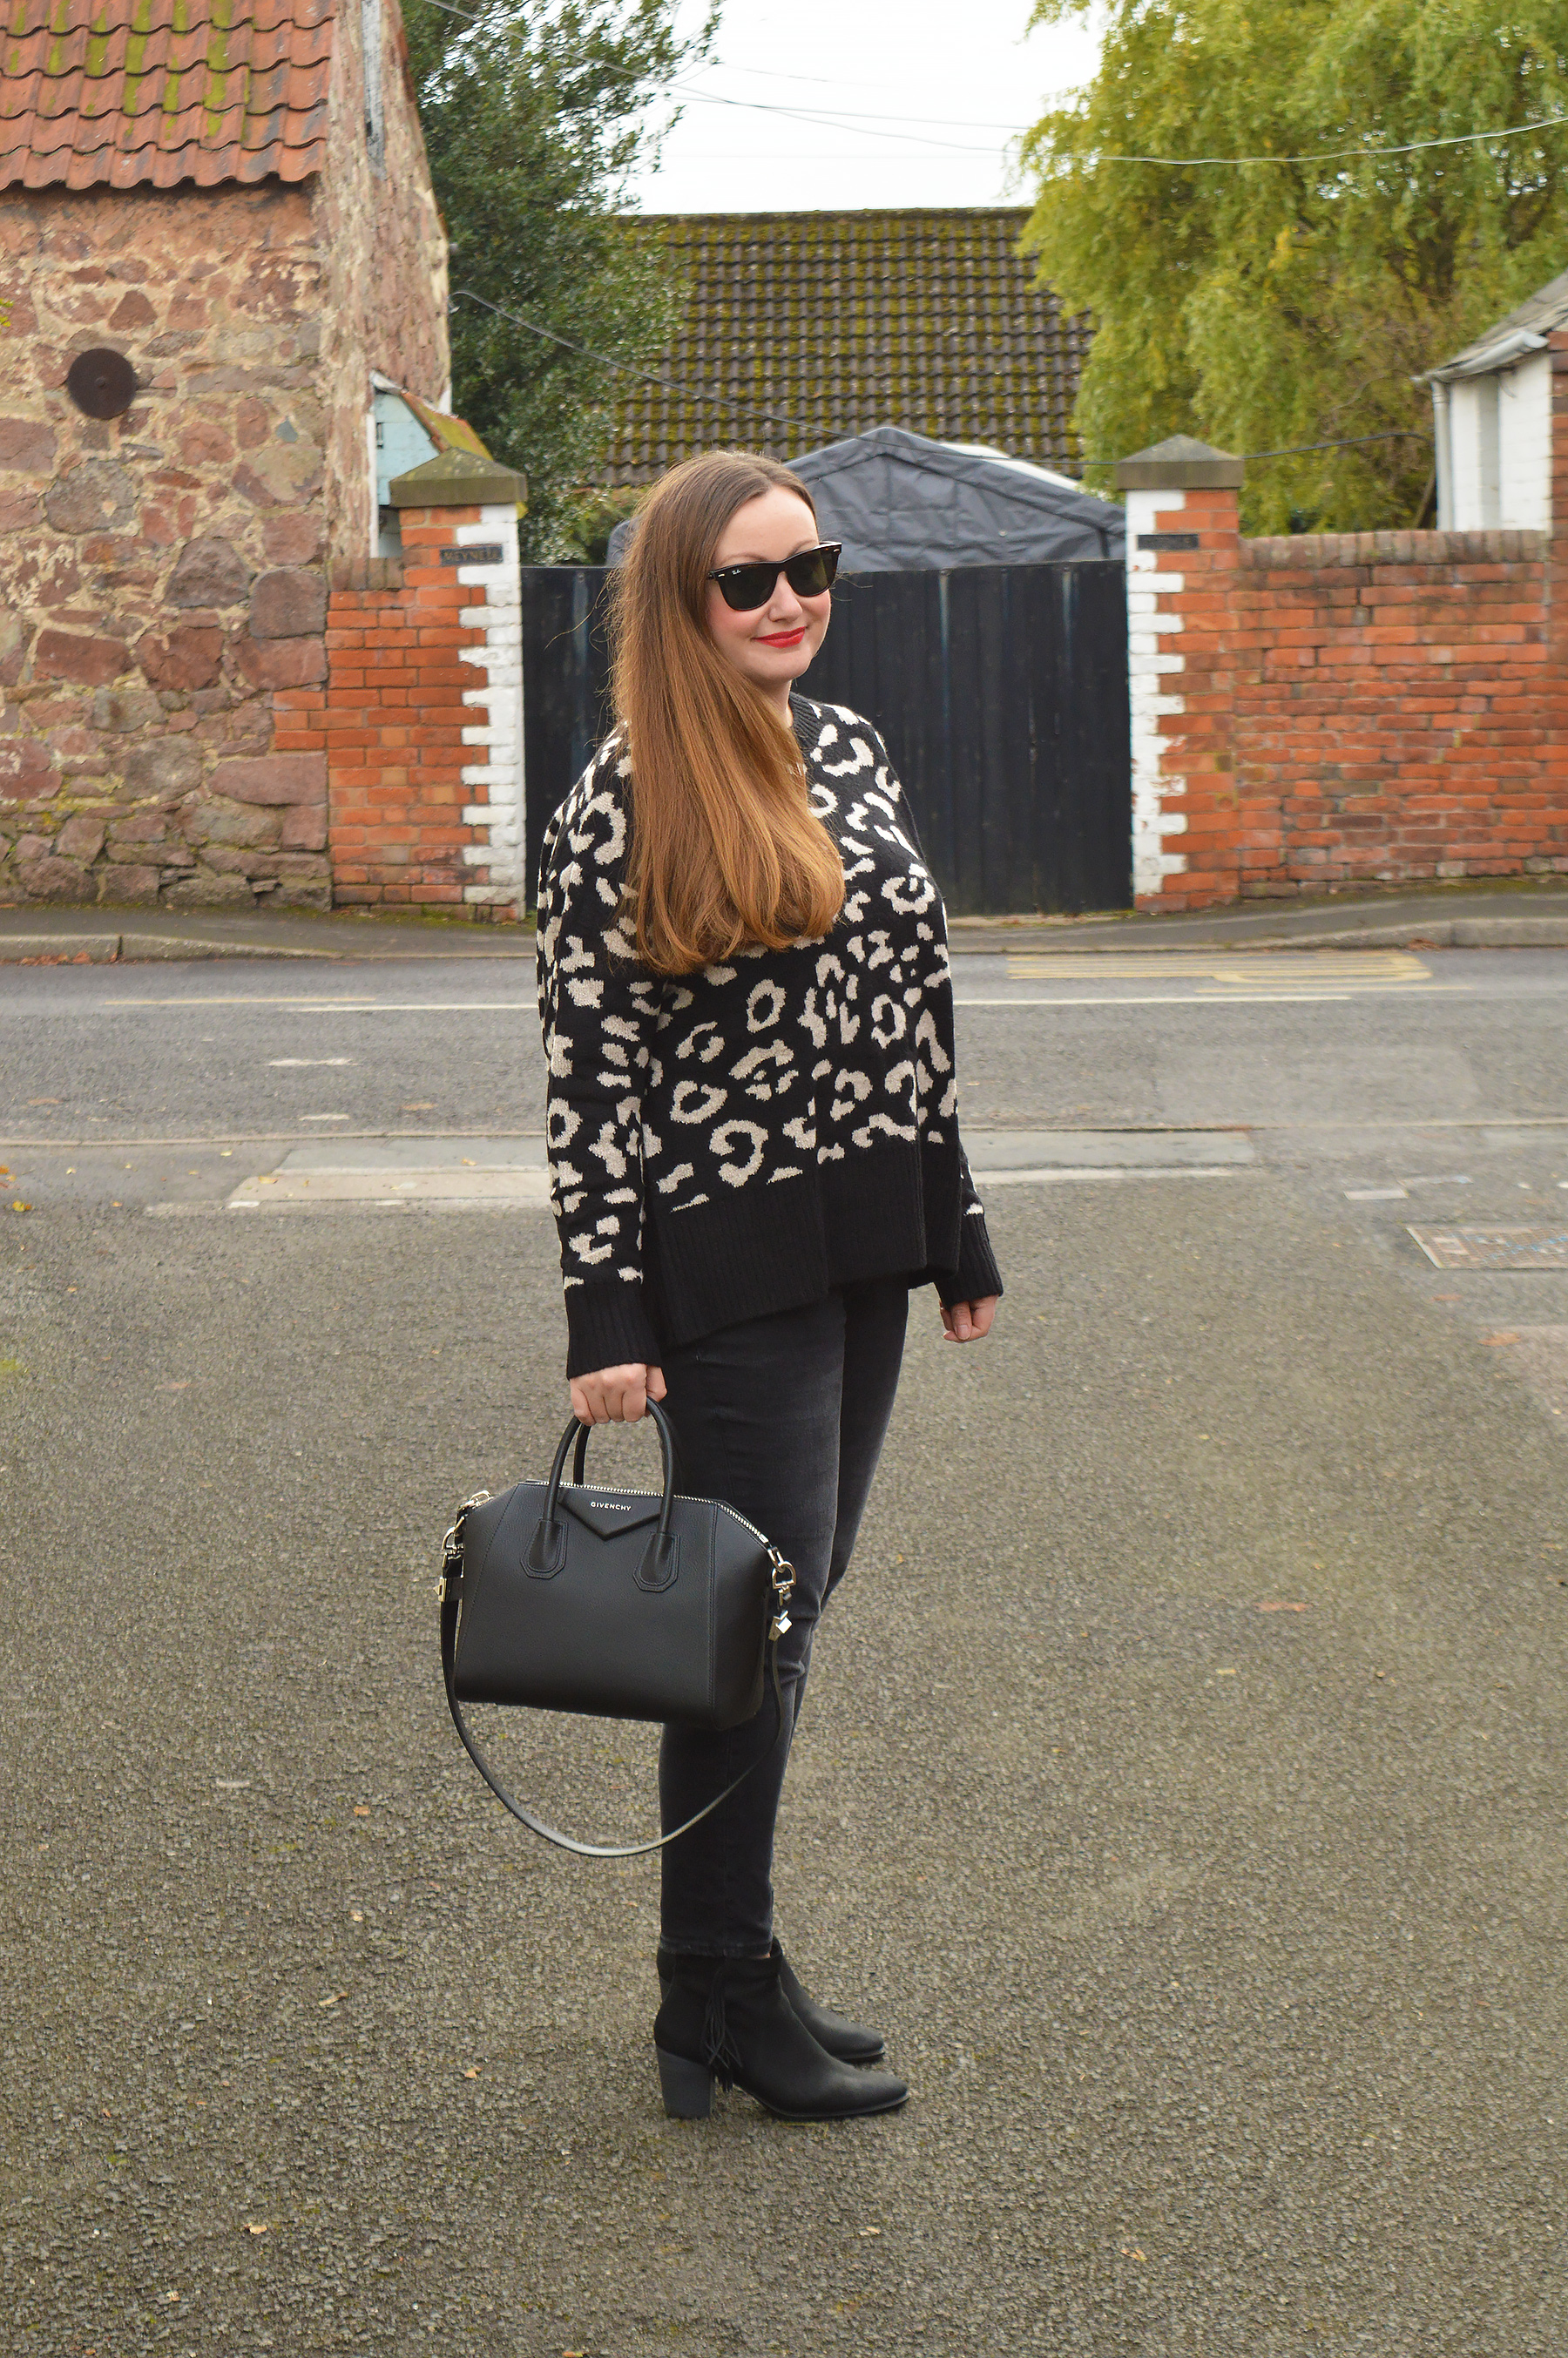 Black and white leopard print outfit